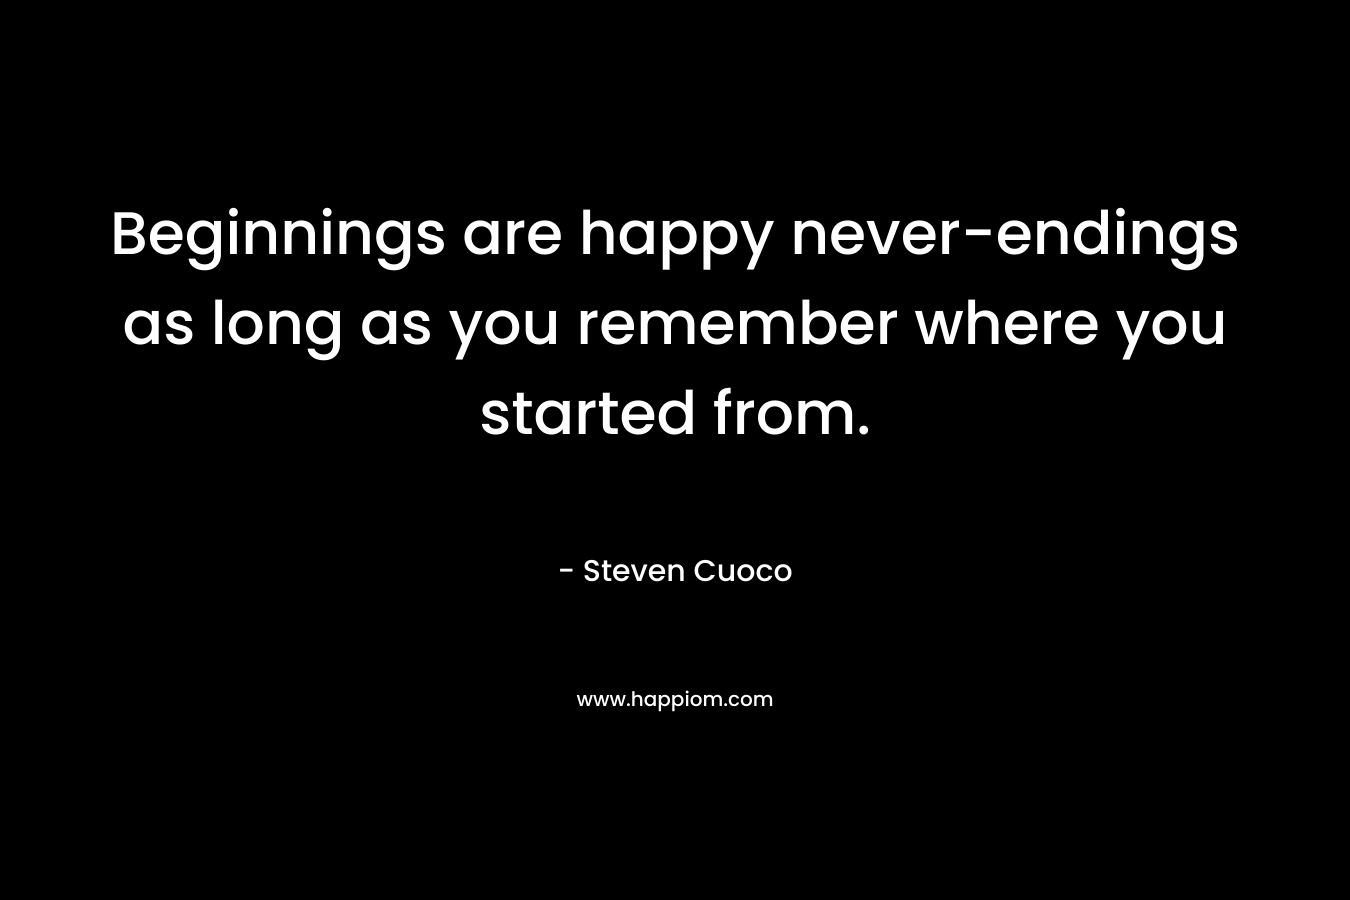 Beginnings are happy never-endings as long as you remember where you started from. – Steven Cuoco